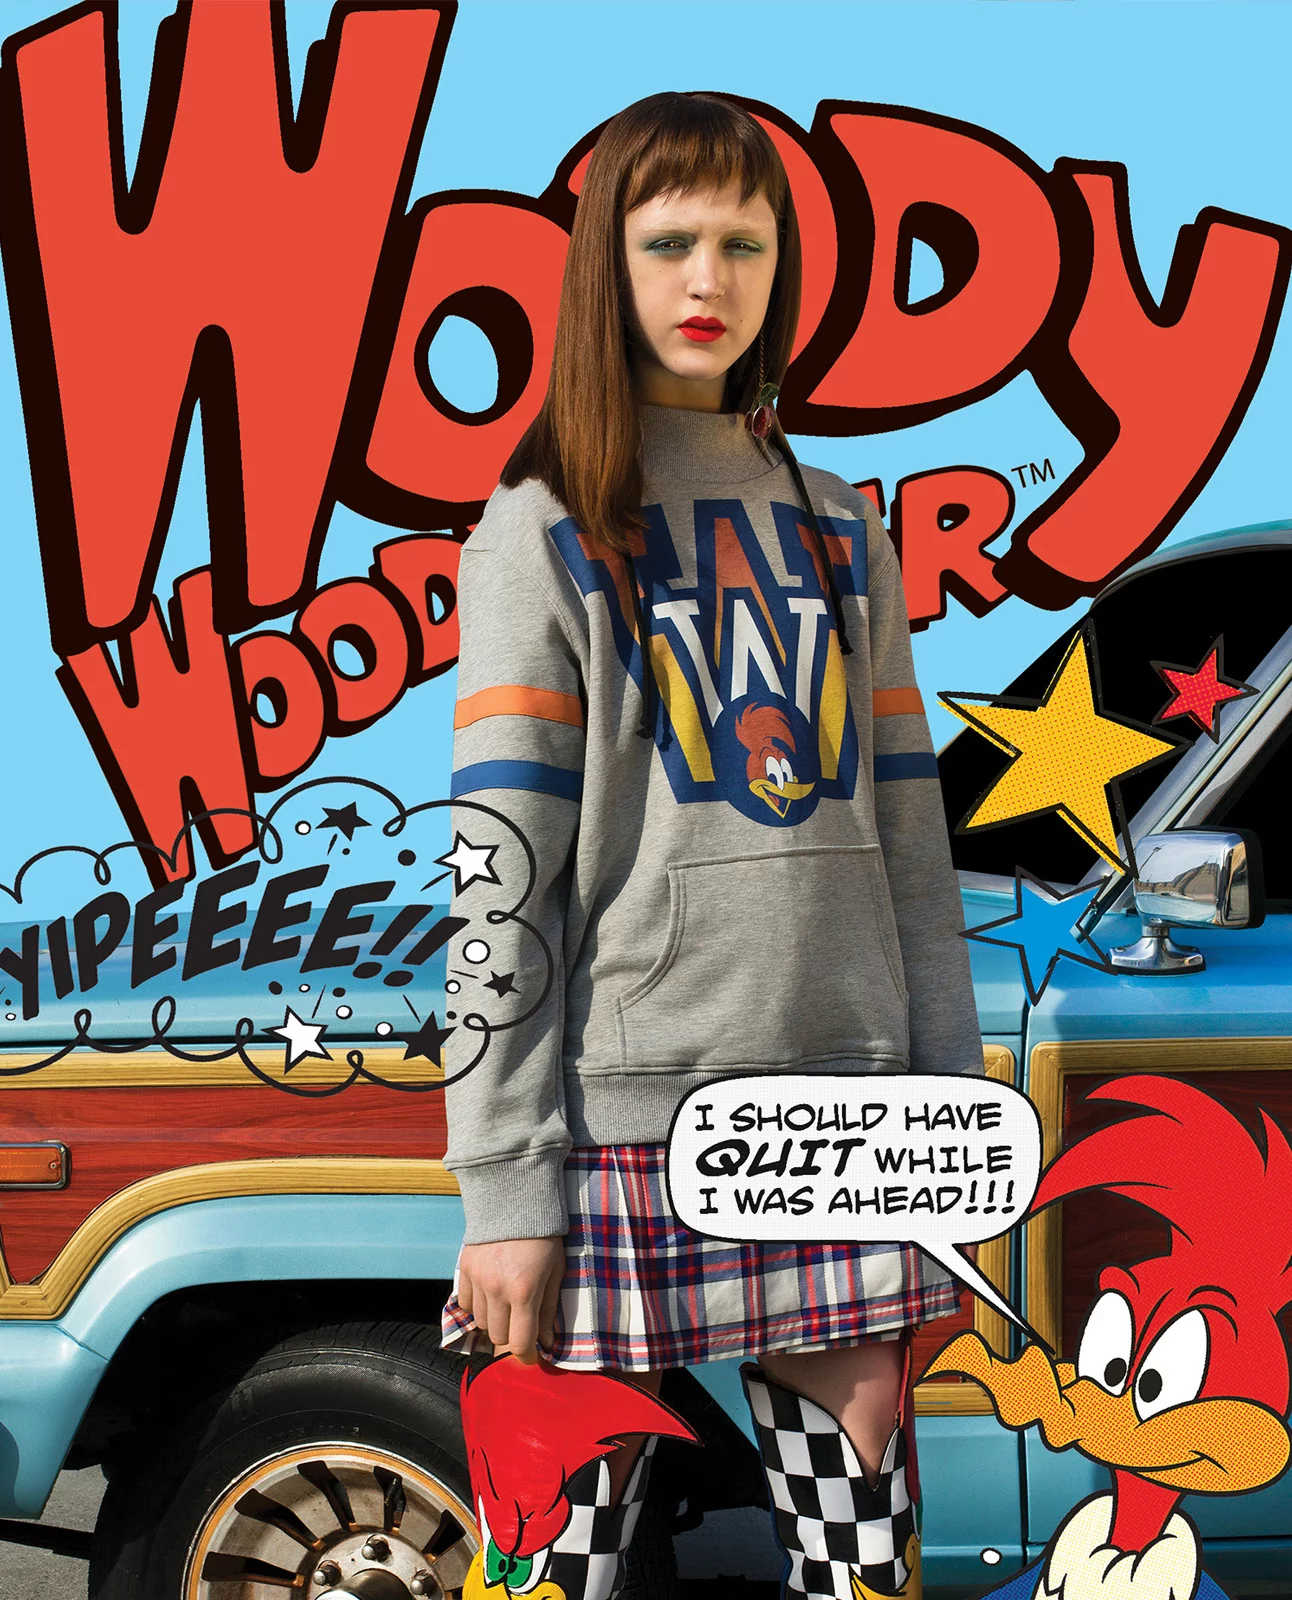 Henry Holland x Woody Woodpecker 1 by Portis WASP